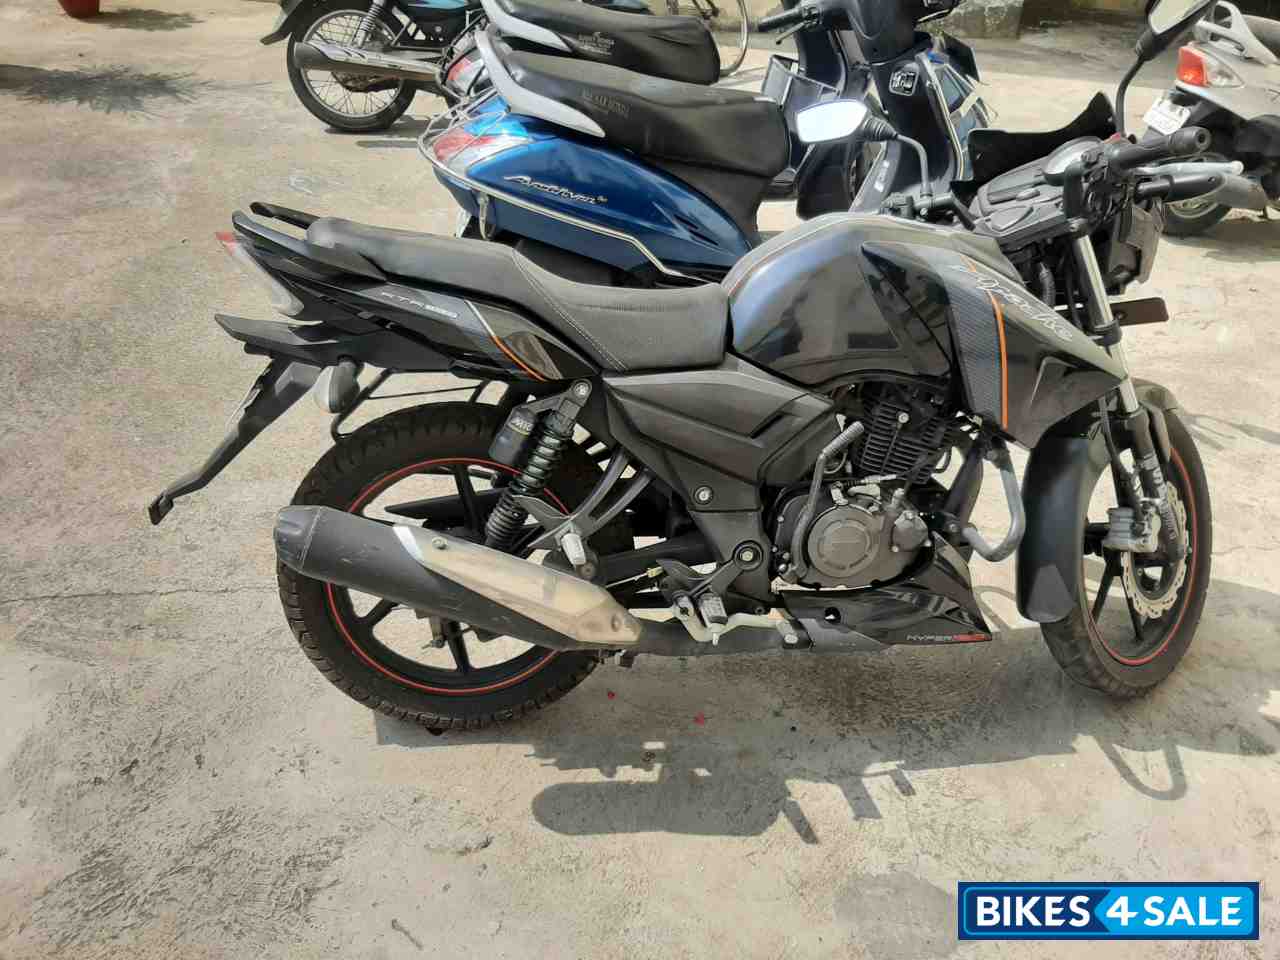 Used 15 Model Tvs Apache Rtr 160 4v For Sale In Lucknow Id Bikes4sale